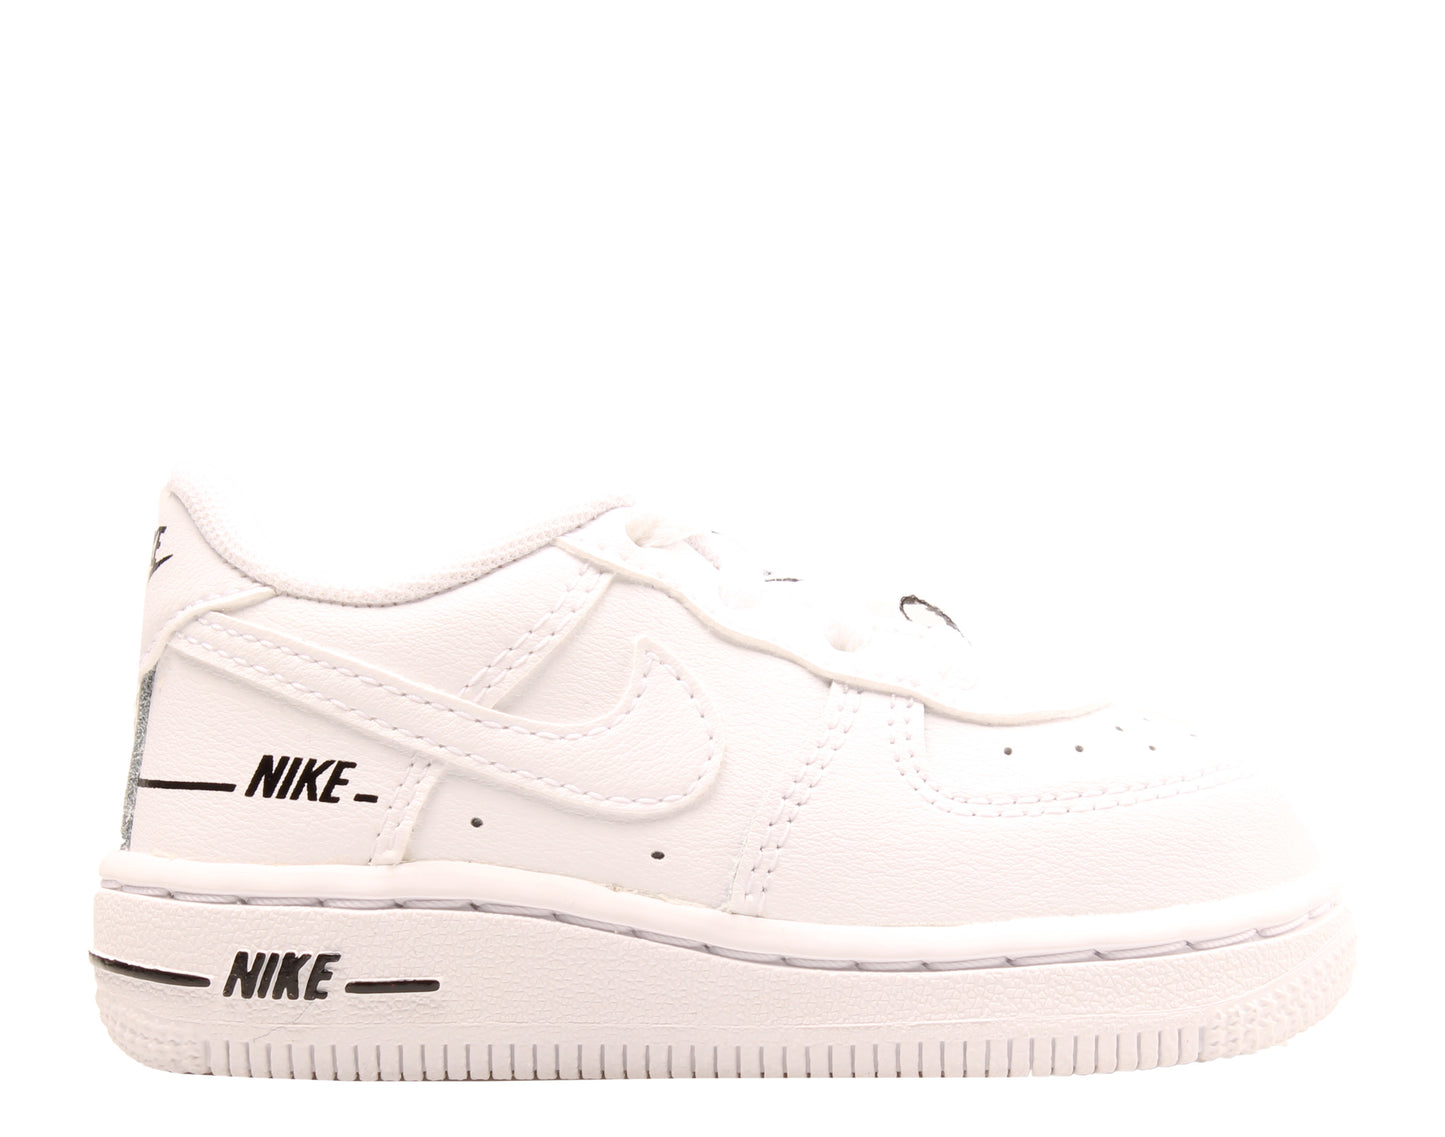 Nike Air Force 1 LV8 3 (TD) Toddler Basketball Shoes